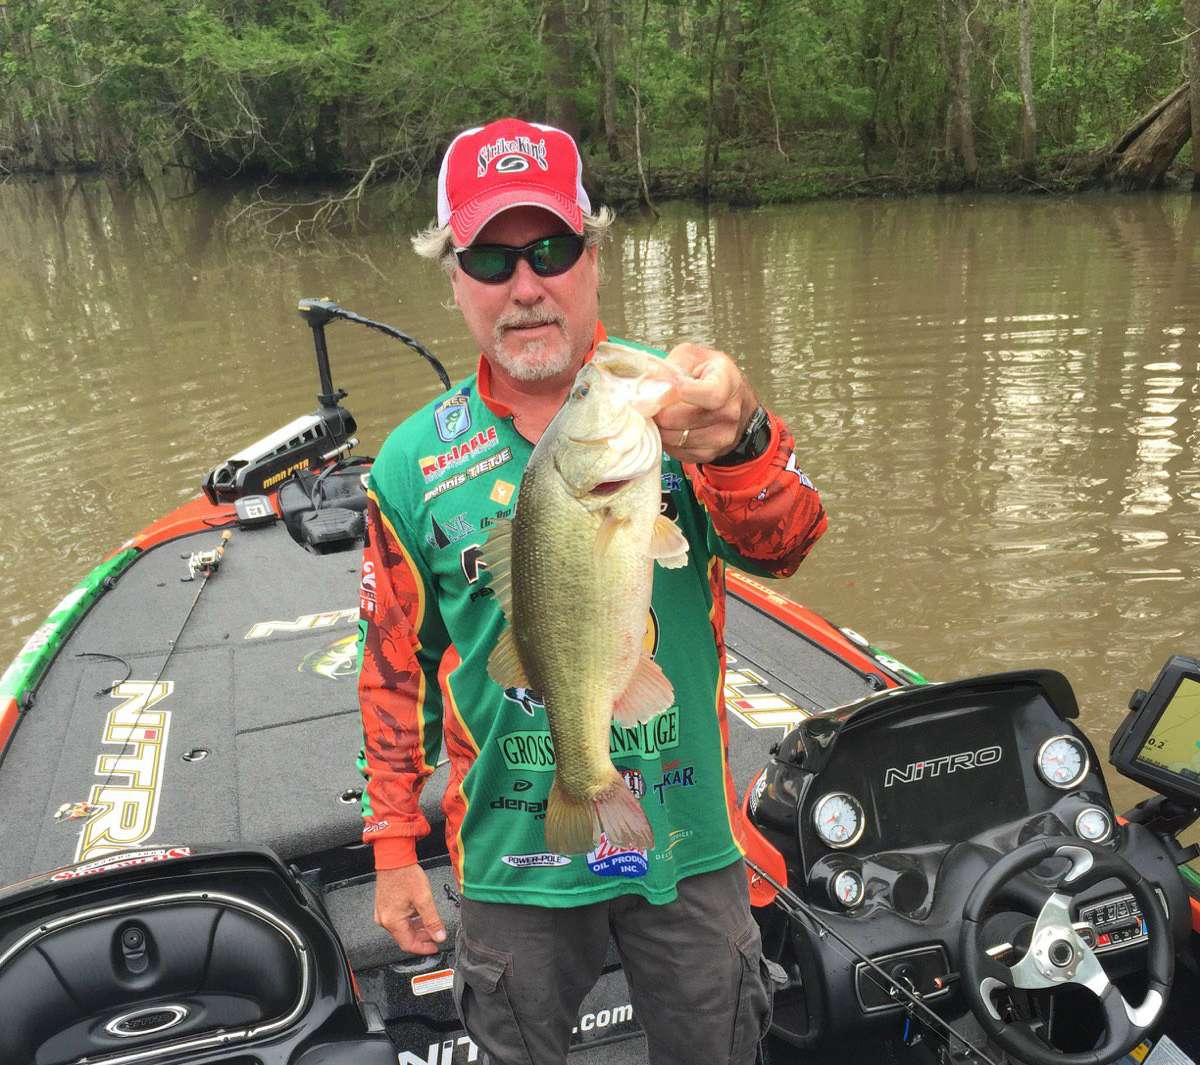 Dennis Tietje with No. 2 on Day 3.
<br>Photo by Bassmaster Marshal Layne Boudreaux